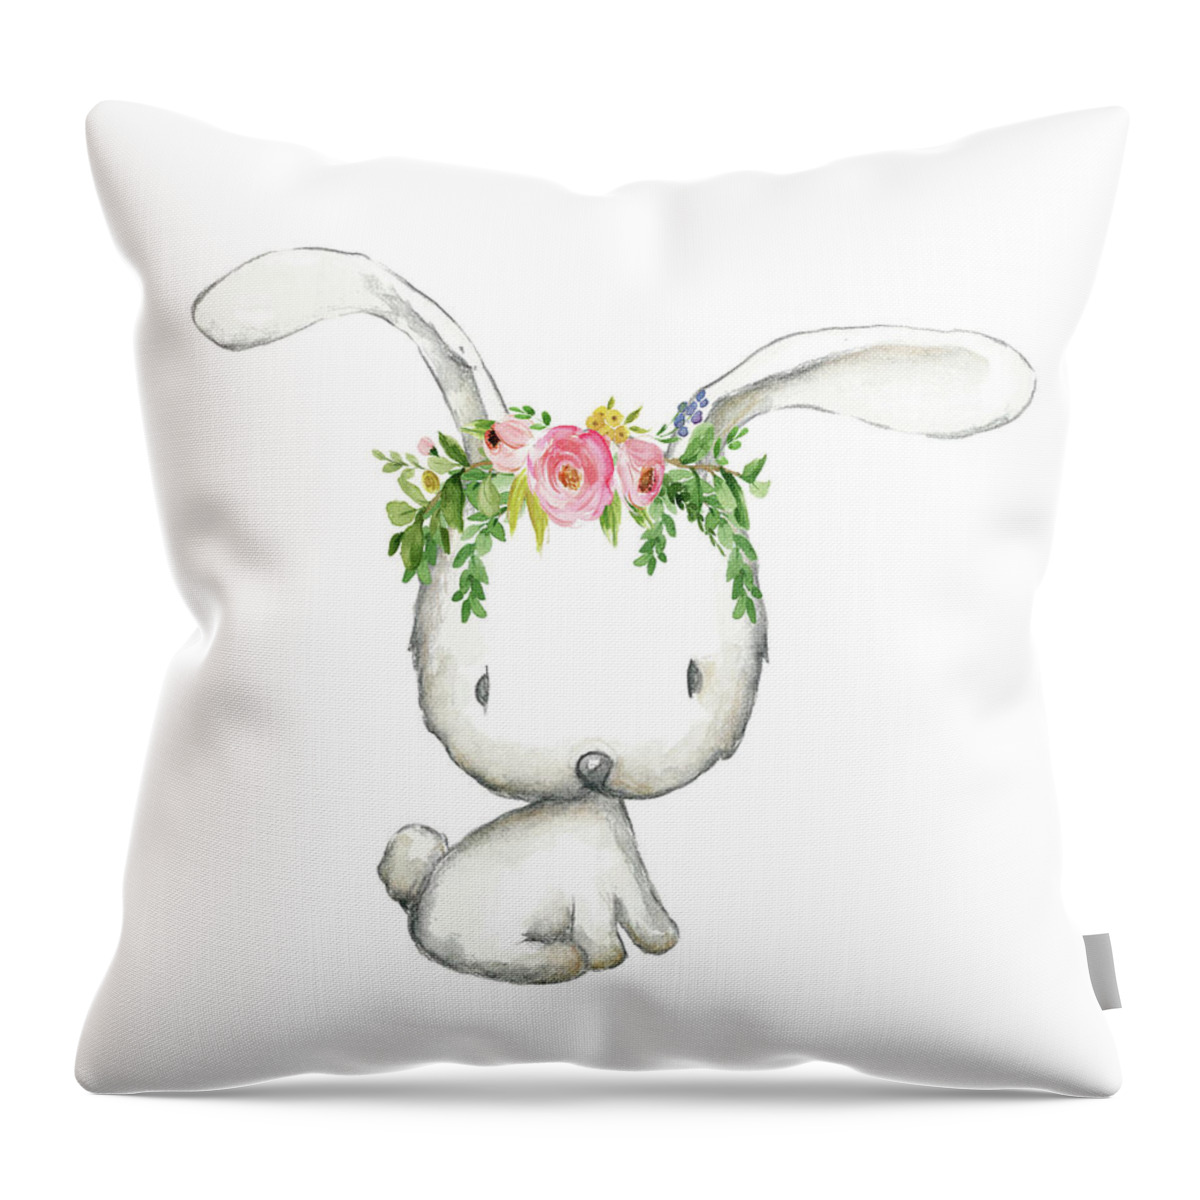 Woodland Throw Pillow featuring the digital art Boho Woodland Bunny Floral Watercolor by Pink Forest Cafe